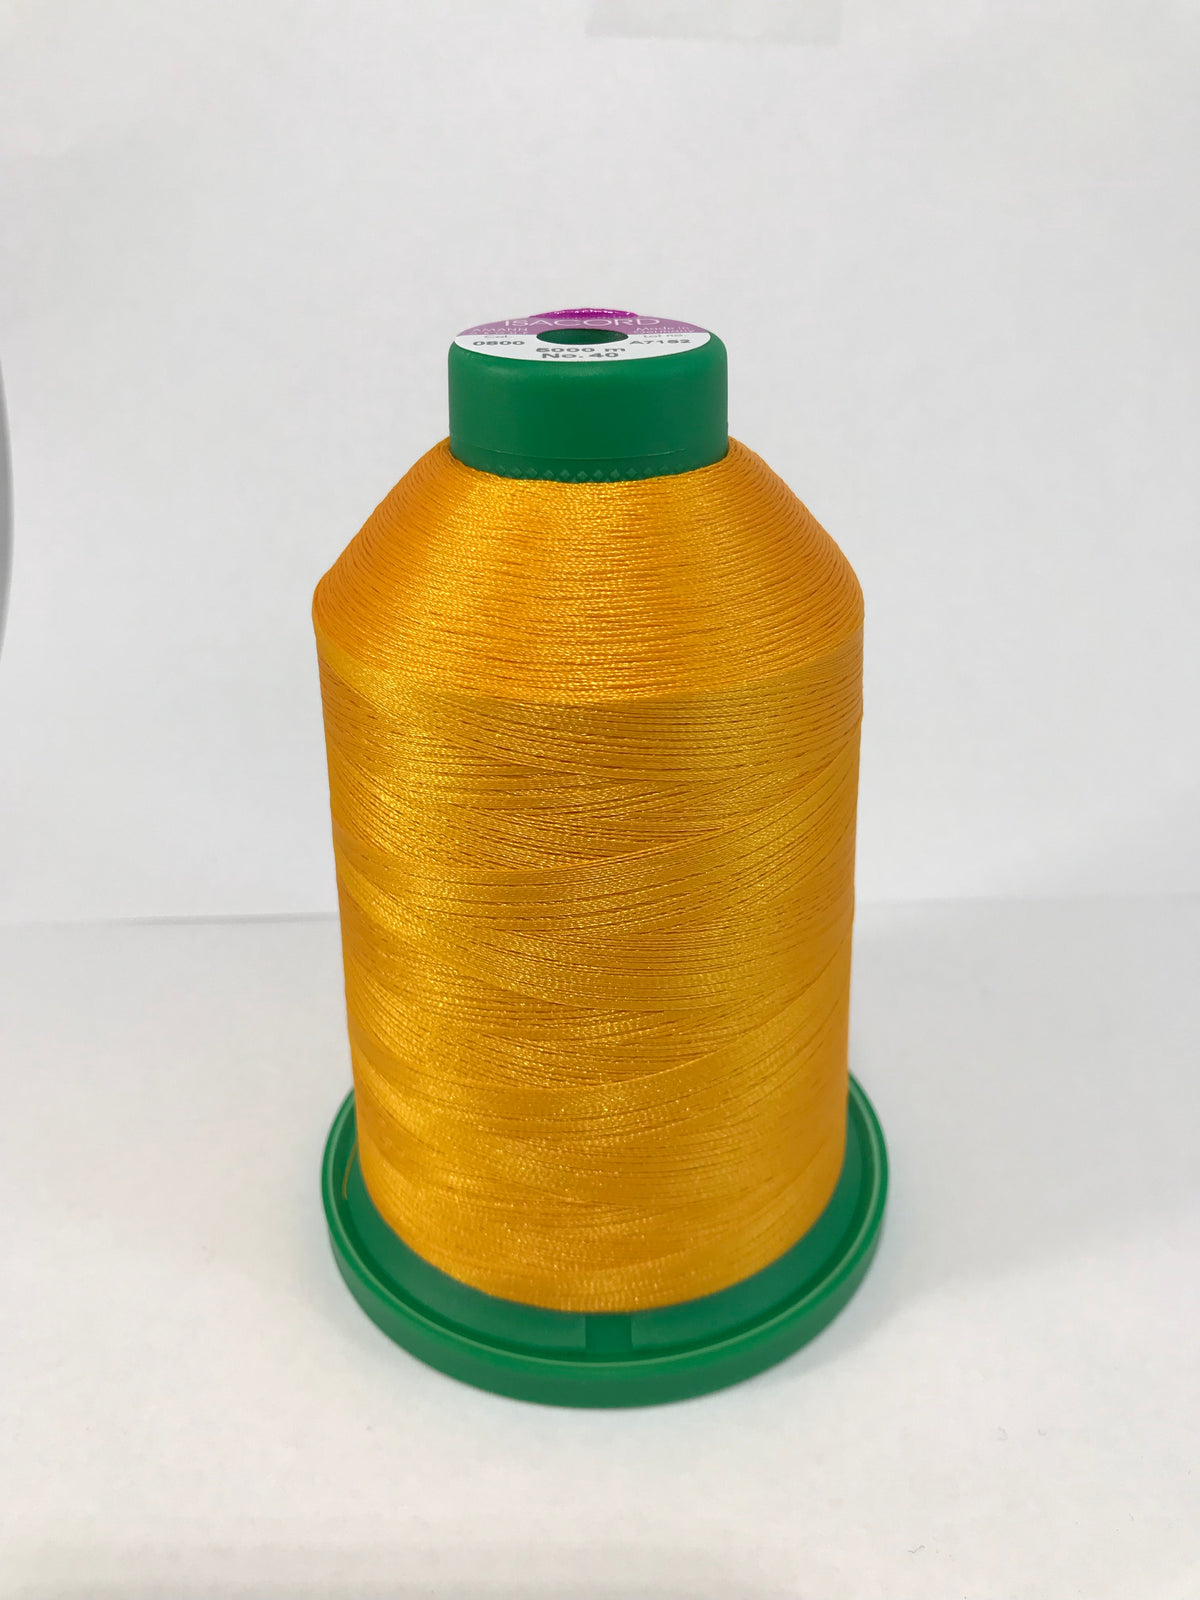 NEW! 50 Cones Isacord Polyester Embroidery Thread Kit #5 New In Wrapper!